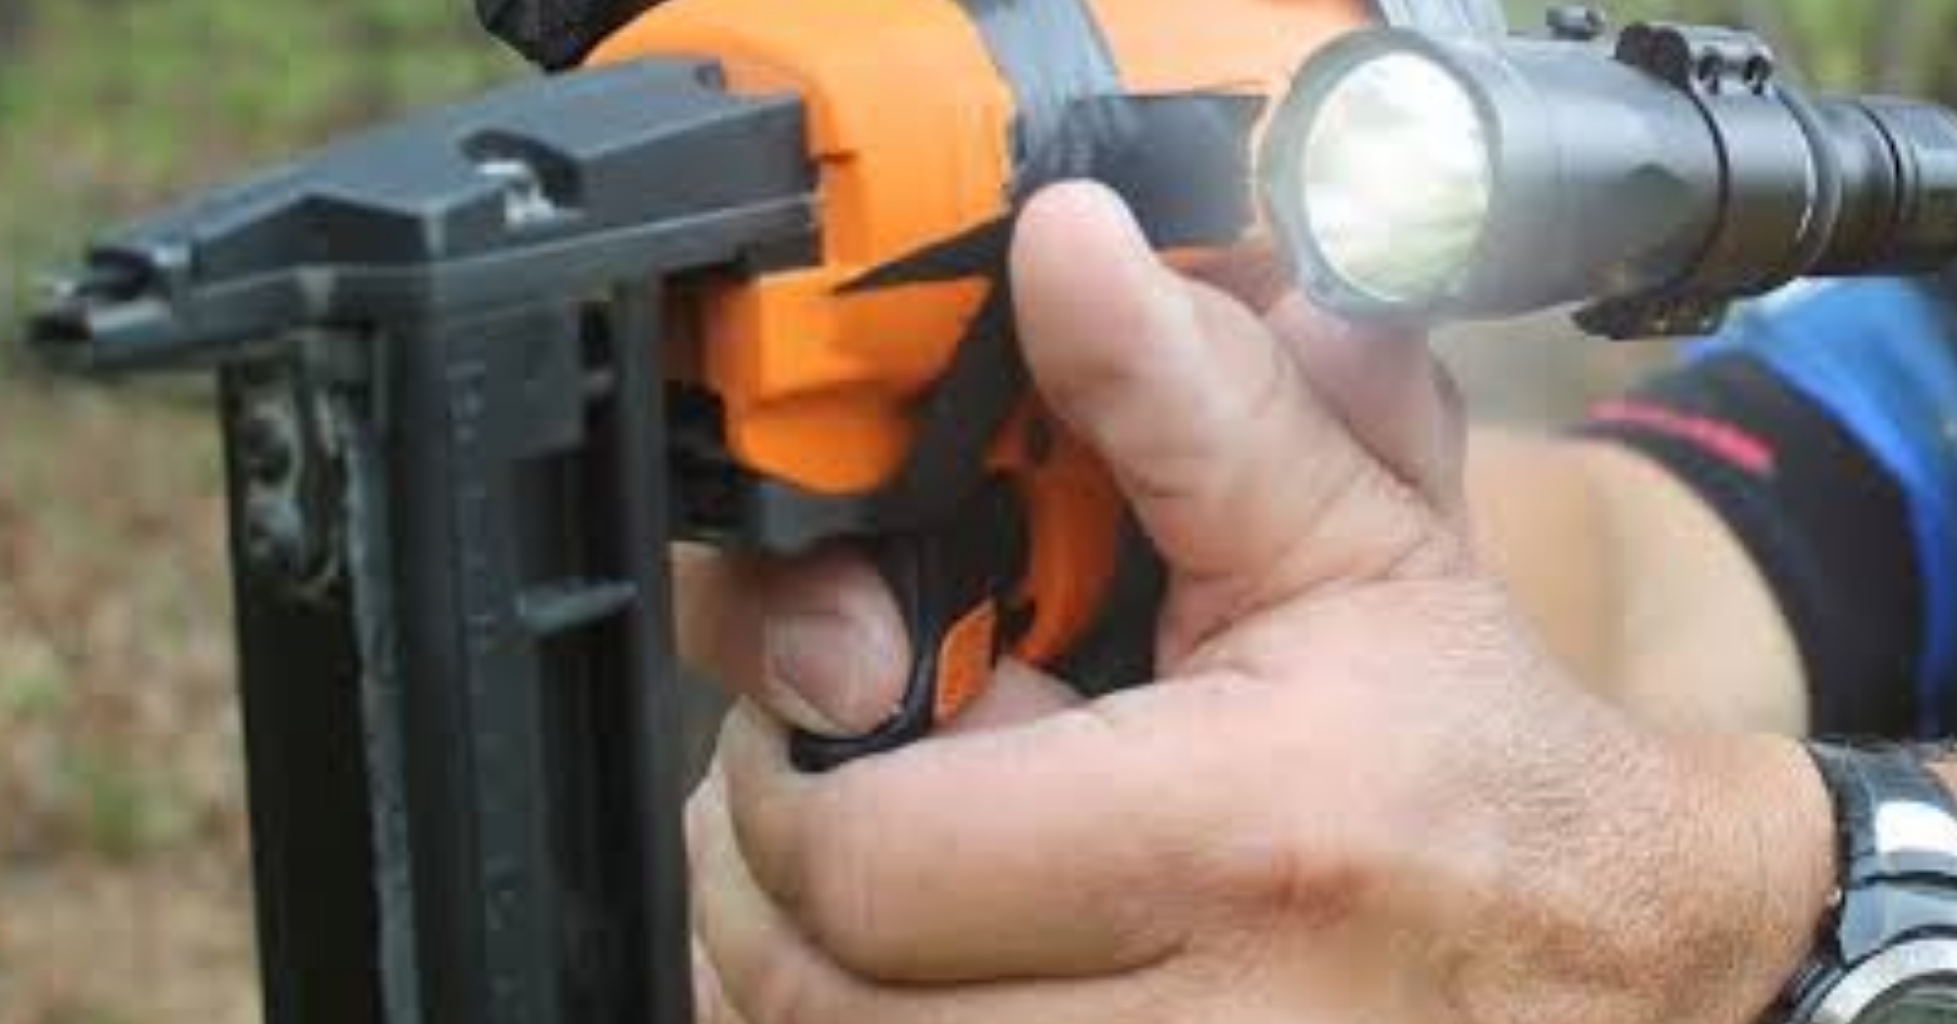 Read more about the article ALLEGED NAIL GUN SHOOTING DURING ROAD RAGE INCIDENT NEAR CESSNOCK